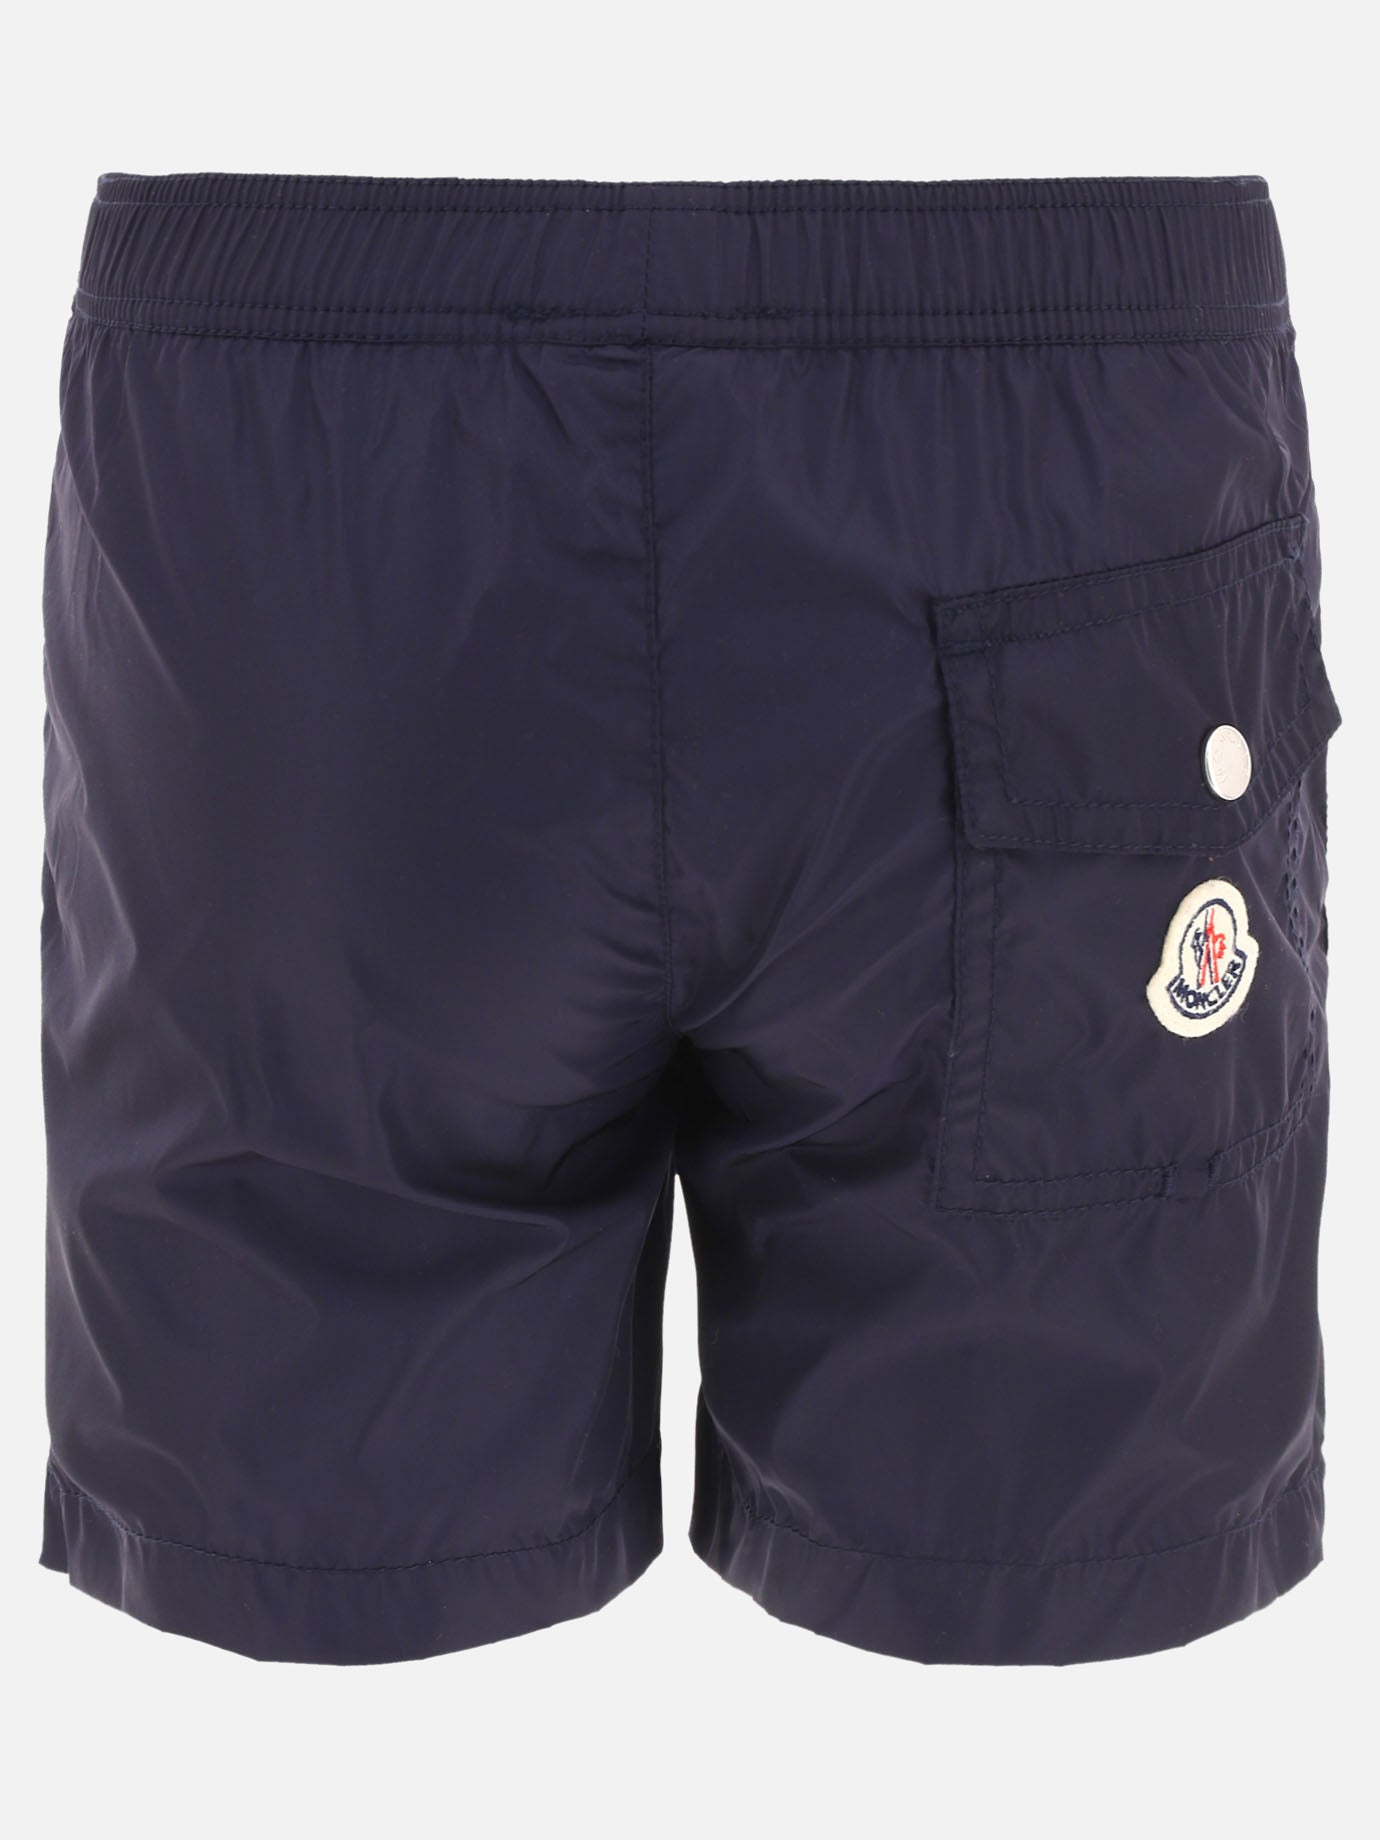 Swim shorts with side bands